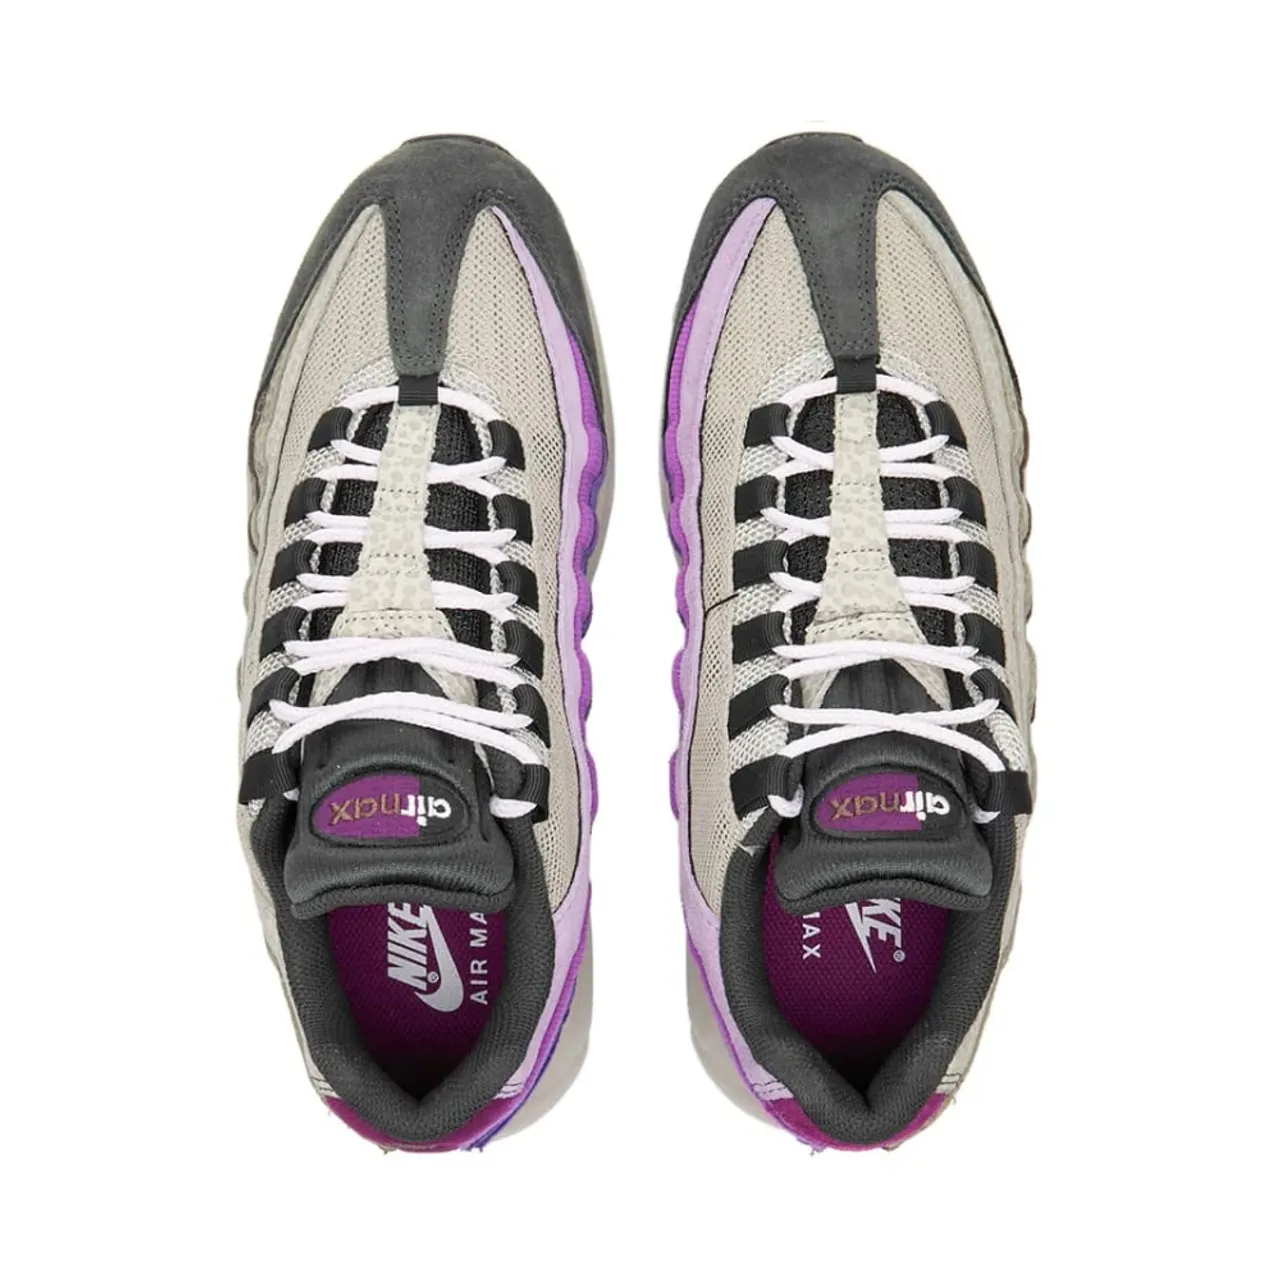 Anthracite Viotech Sneakers Nike